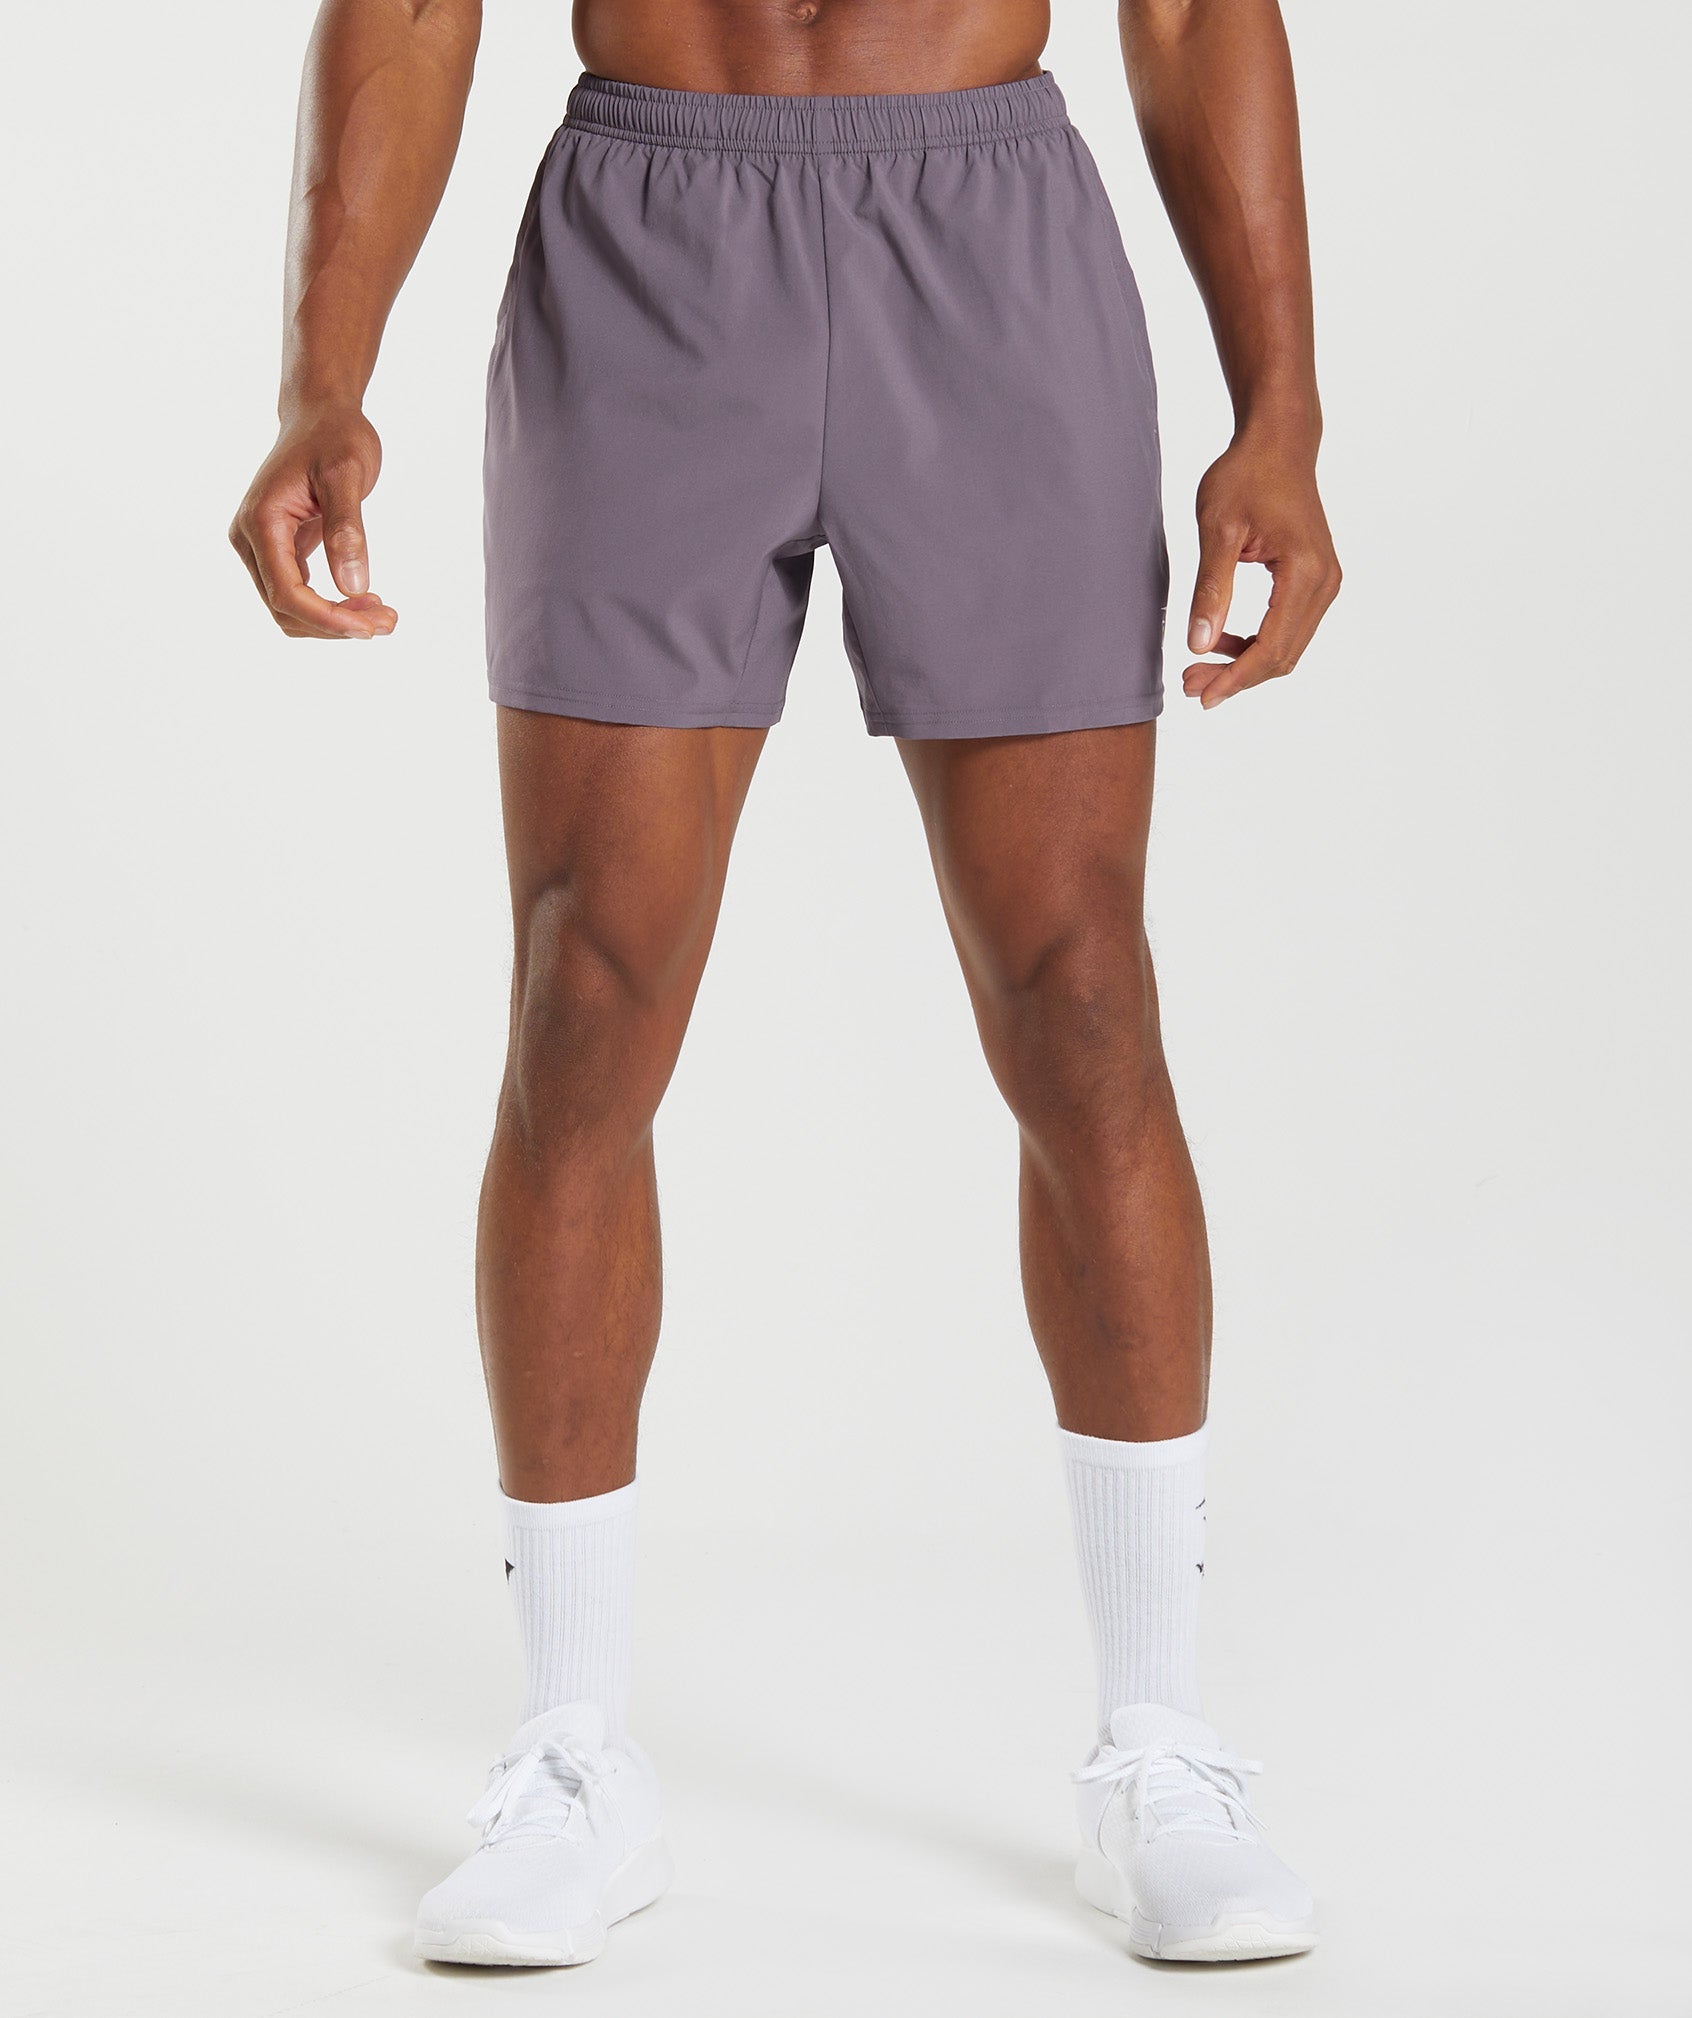 Arrival 5" Shorts in Musk Lilac - view 1